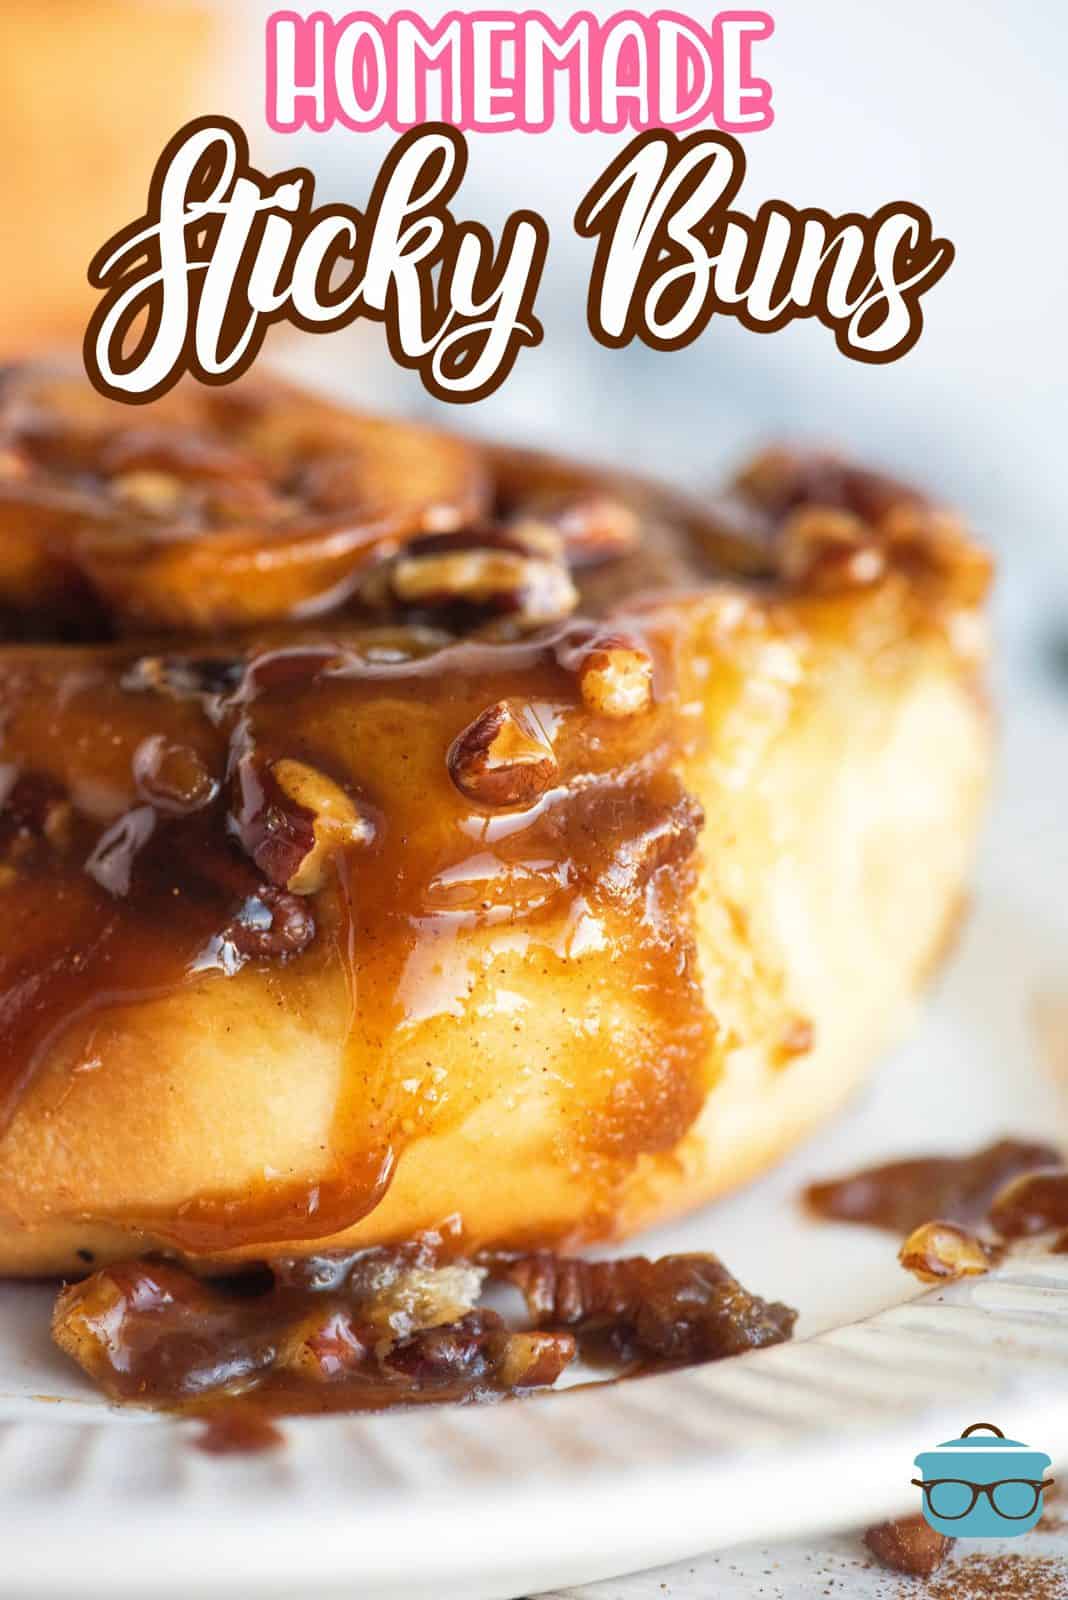 Pinterest image of close up side view of one Homemade Sticky Bun.